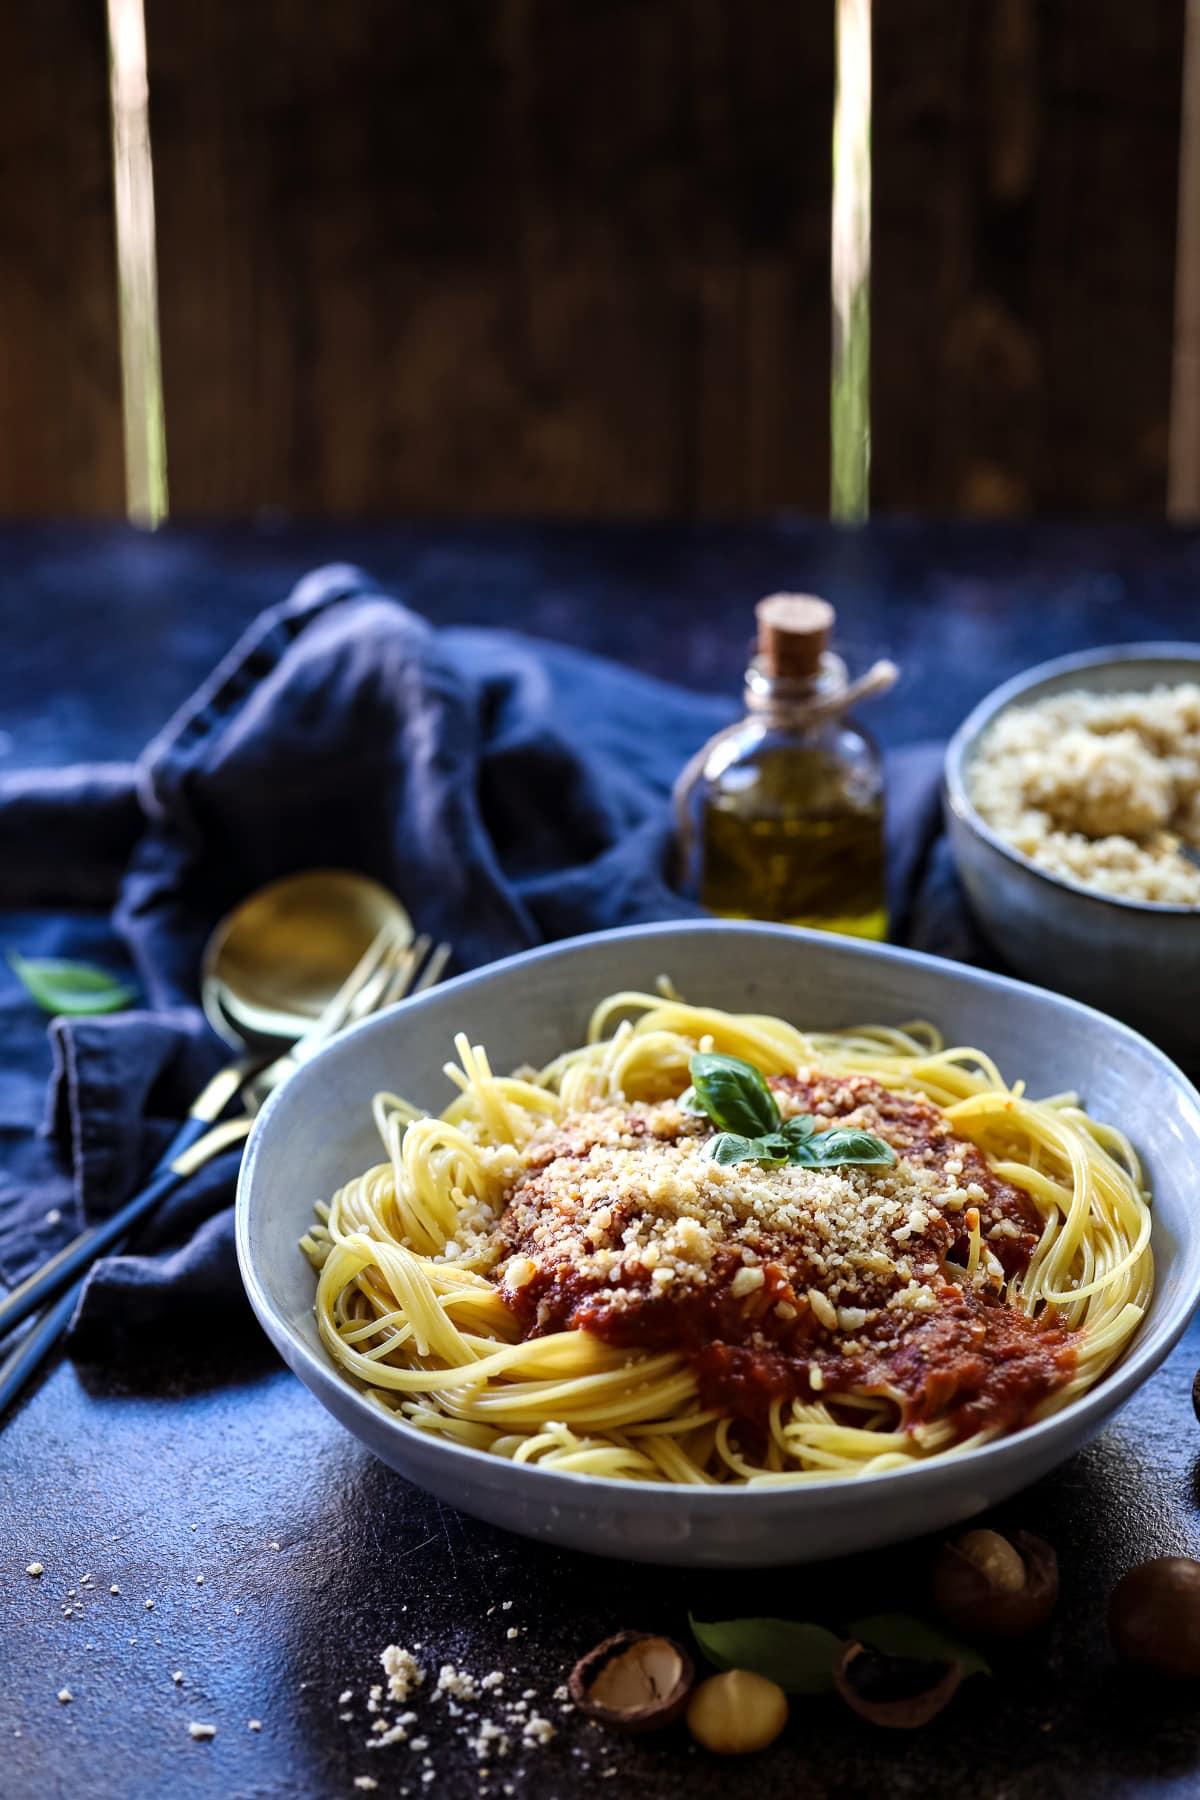 Spaghetti with Tomato Sauce and Vegan Parmesan Next to a Bottle of Olive Oil.